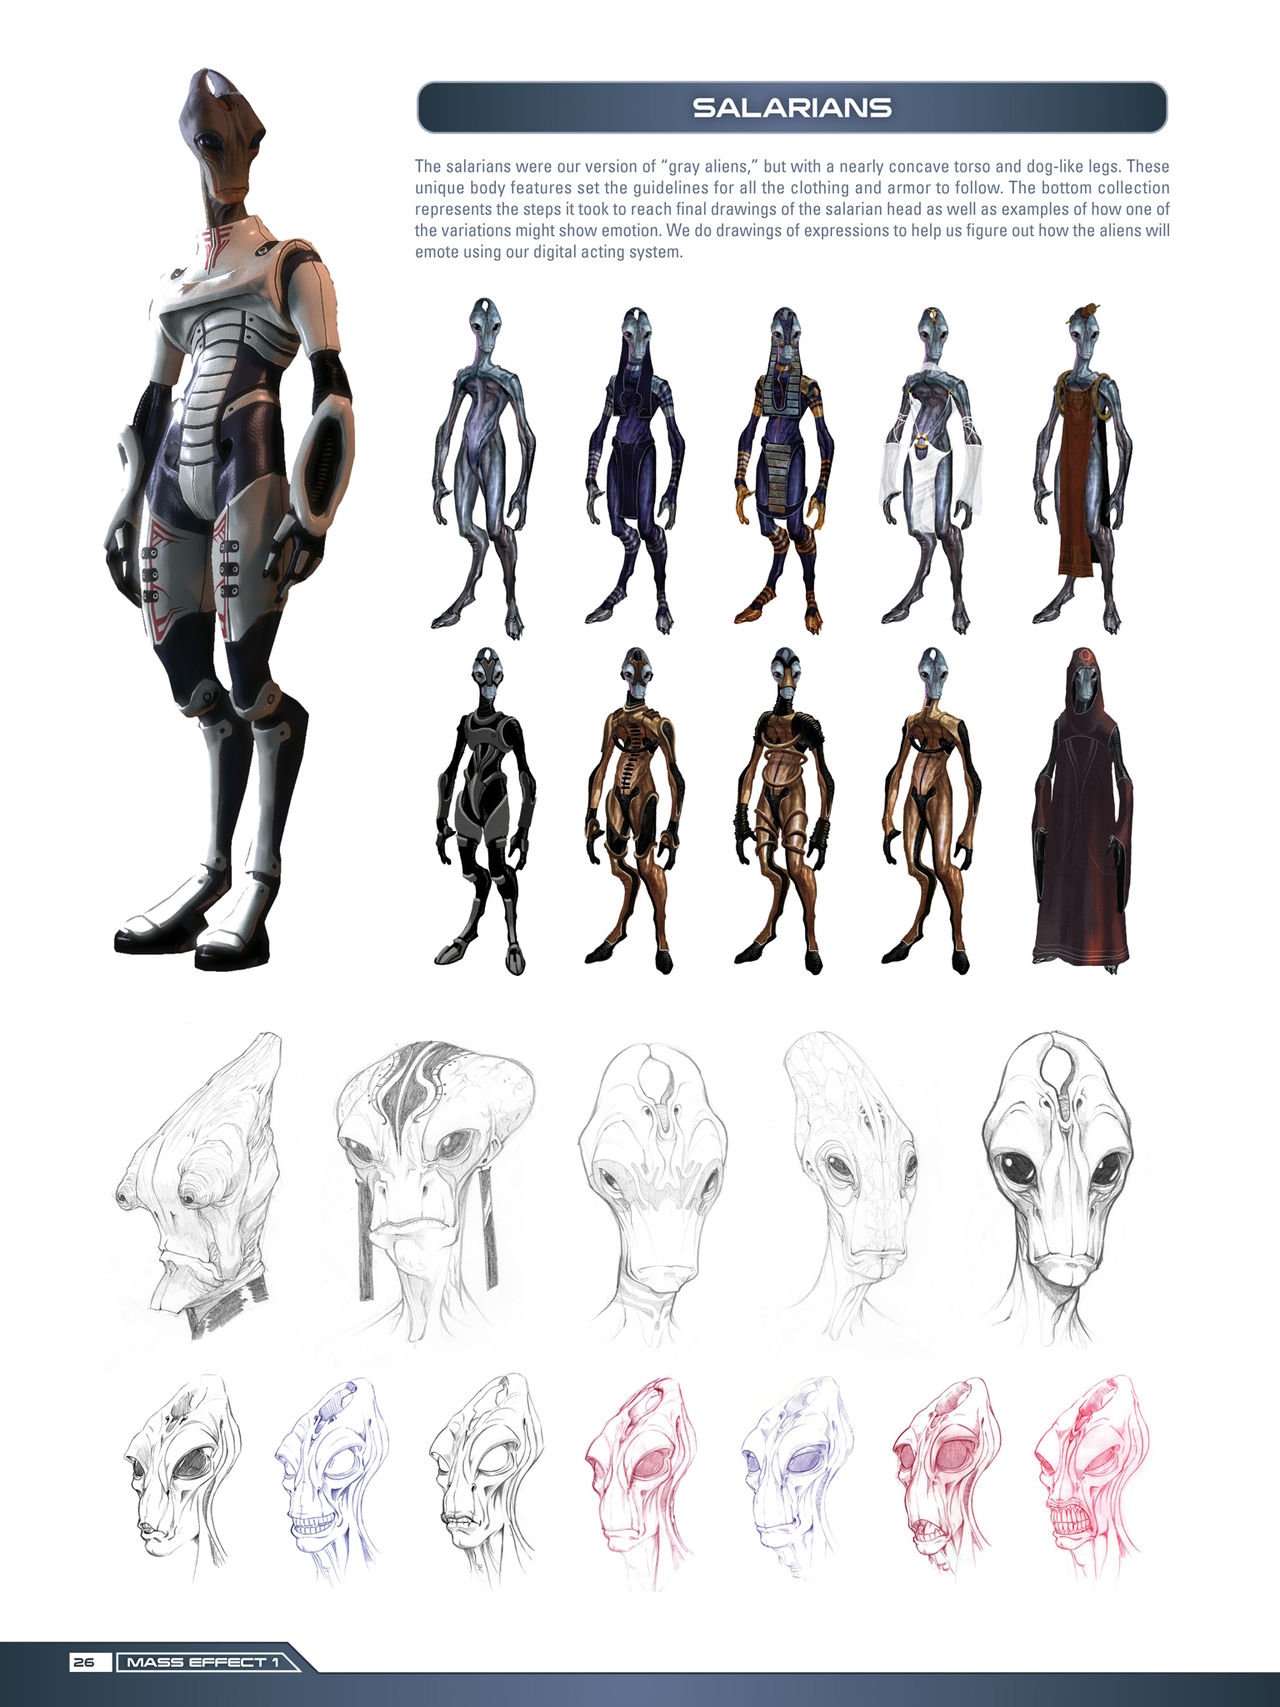 The Art of the Mass Effect Trilogy - Expanded Edition 26